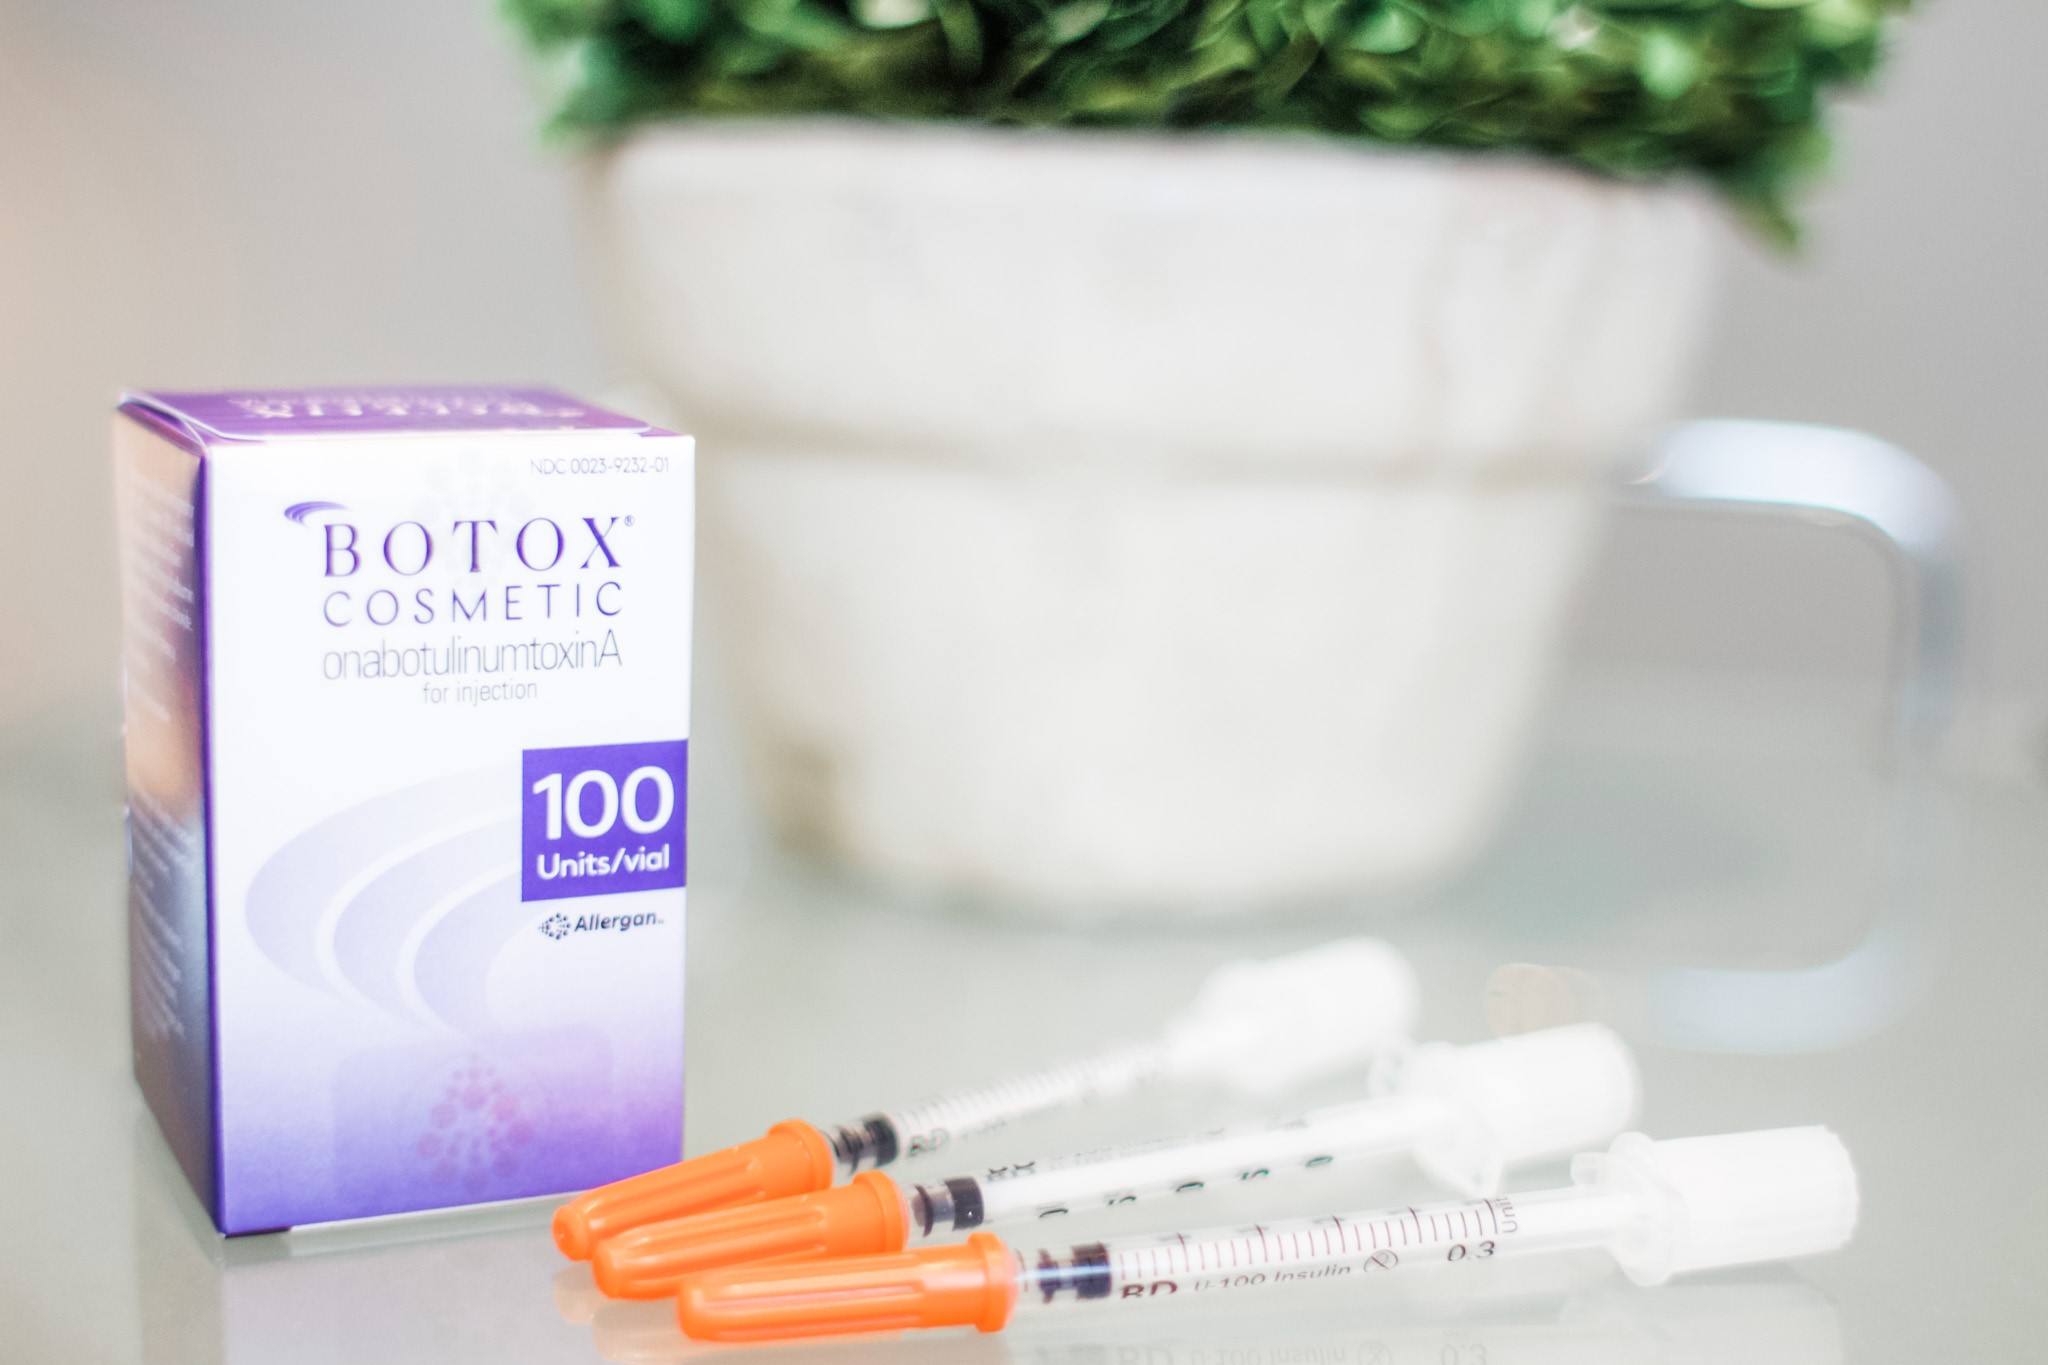 botox box with needles on a counter